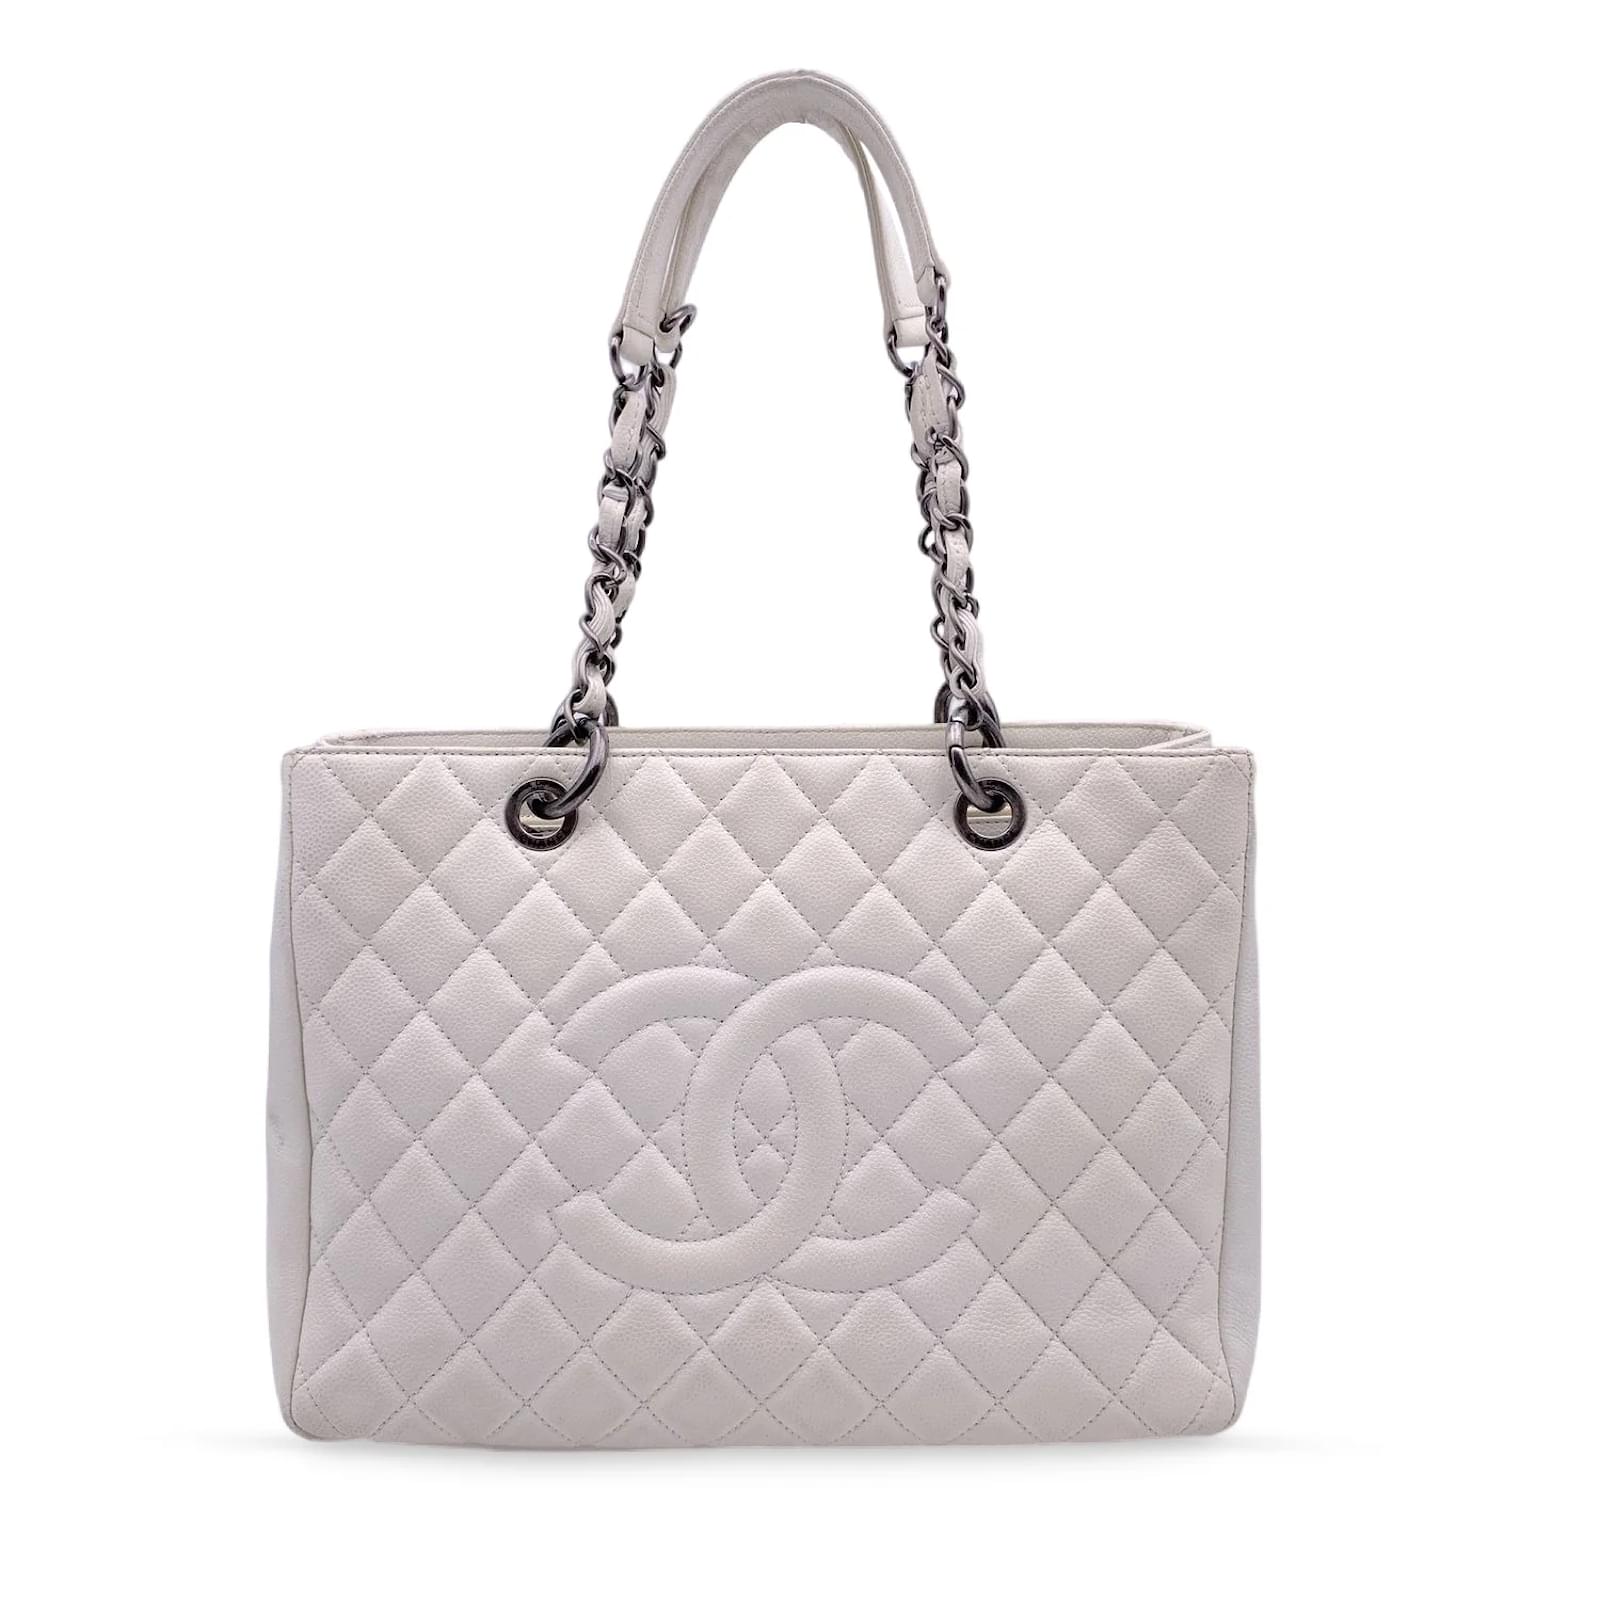 Chanel White Quilted Caviar Leather GST Grand Shopping Tote Bag